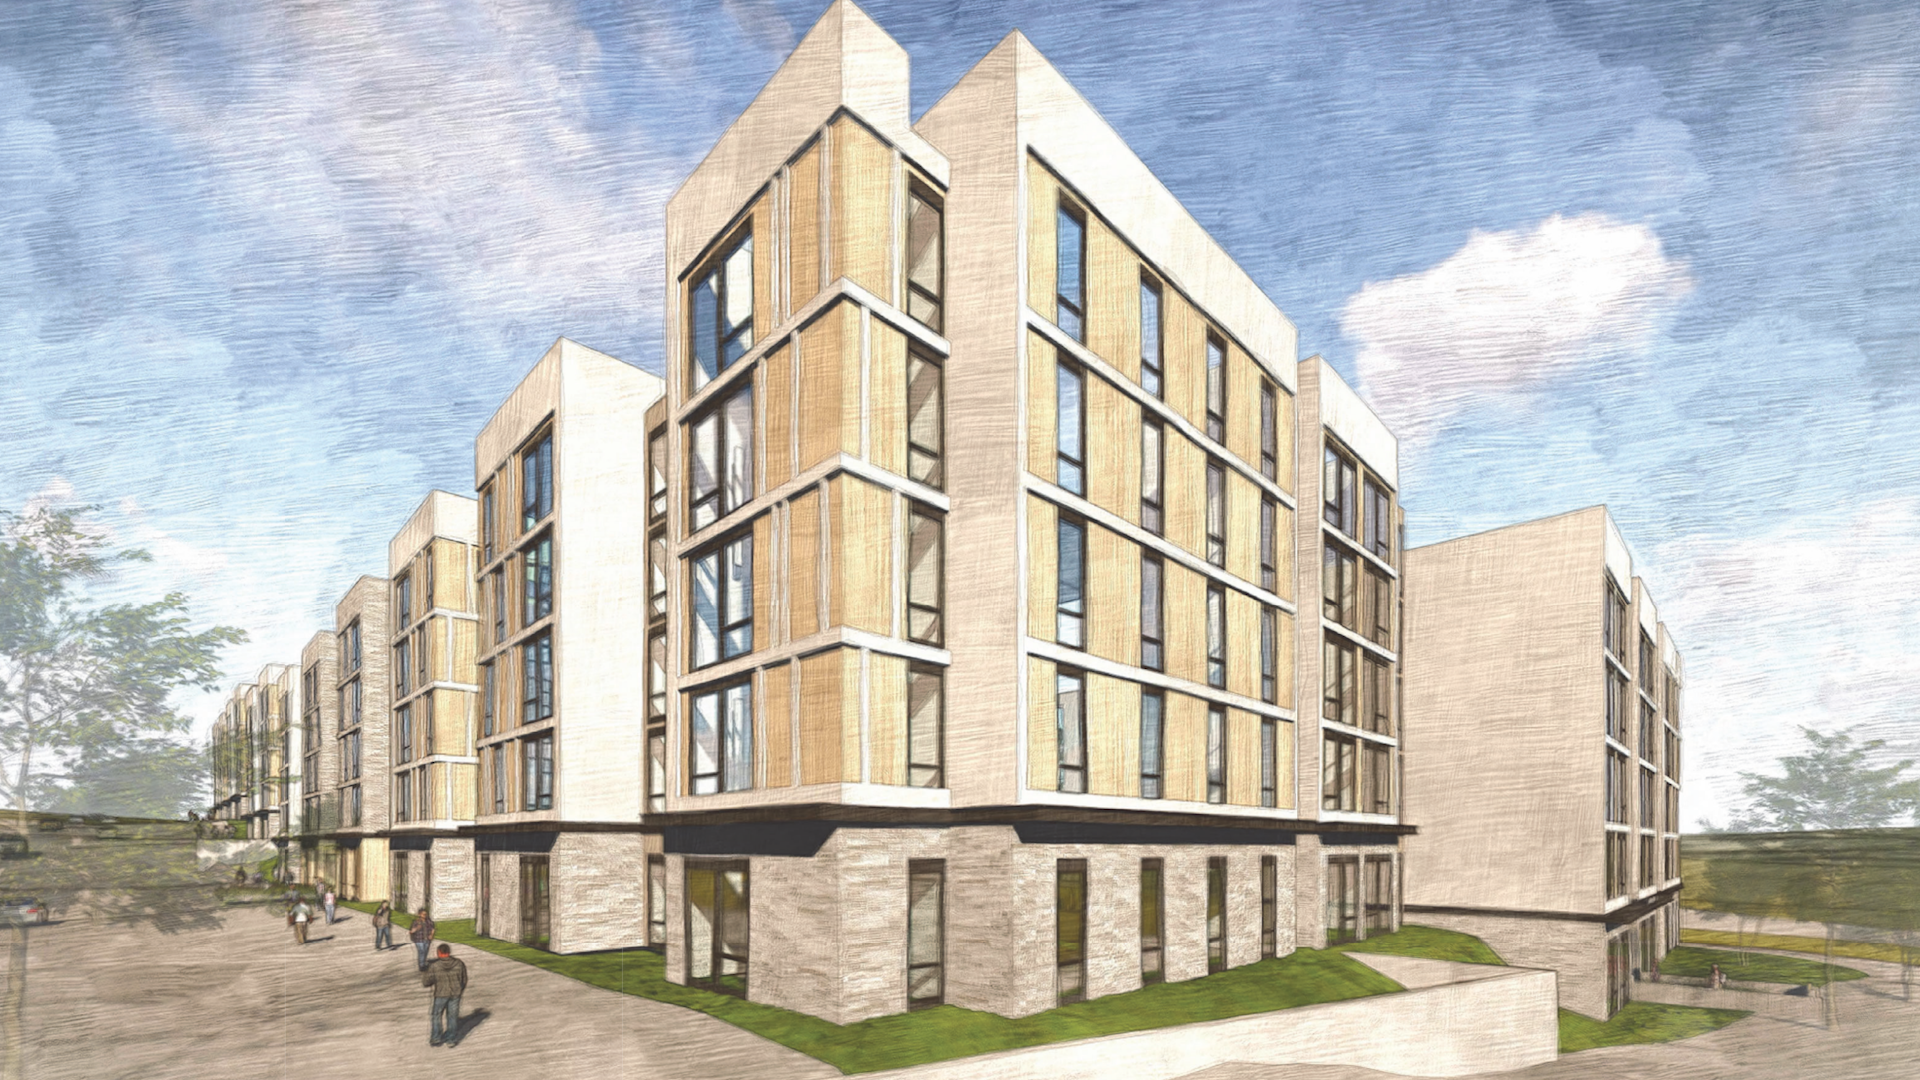 New student apartment building site plan gets approval